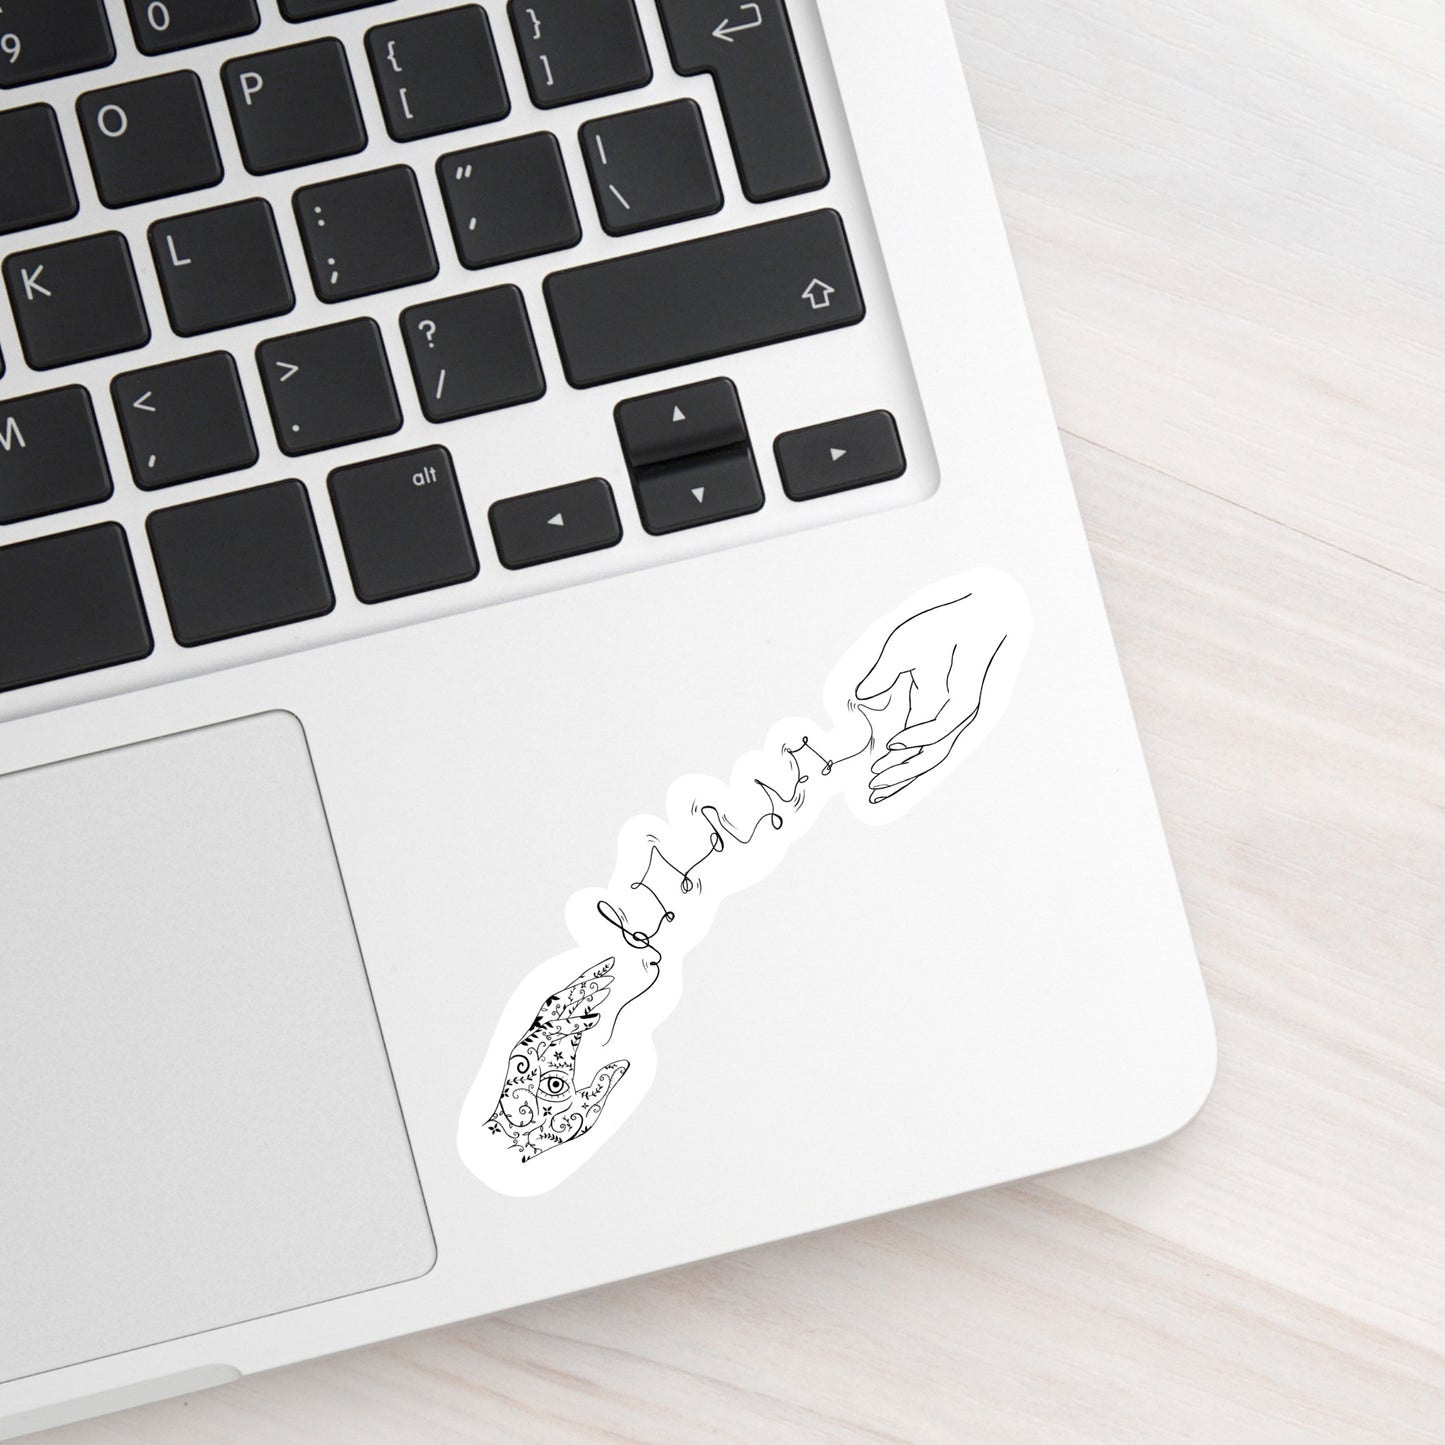 A laptop with a black and white sticker on. An outline of two hands connected by a wave of musical notes. One hand has tattoos on it. The sticker is on a laptop